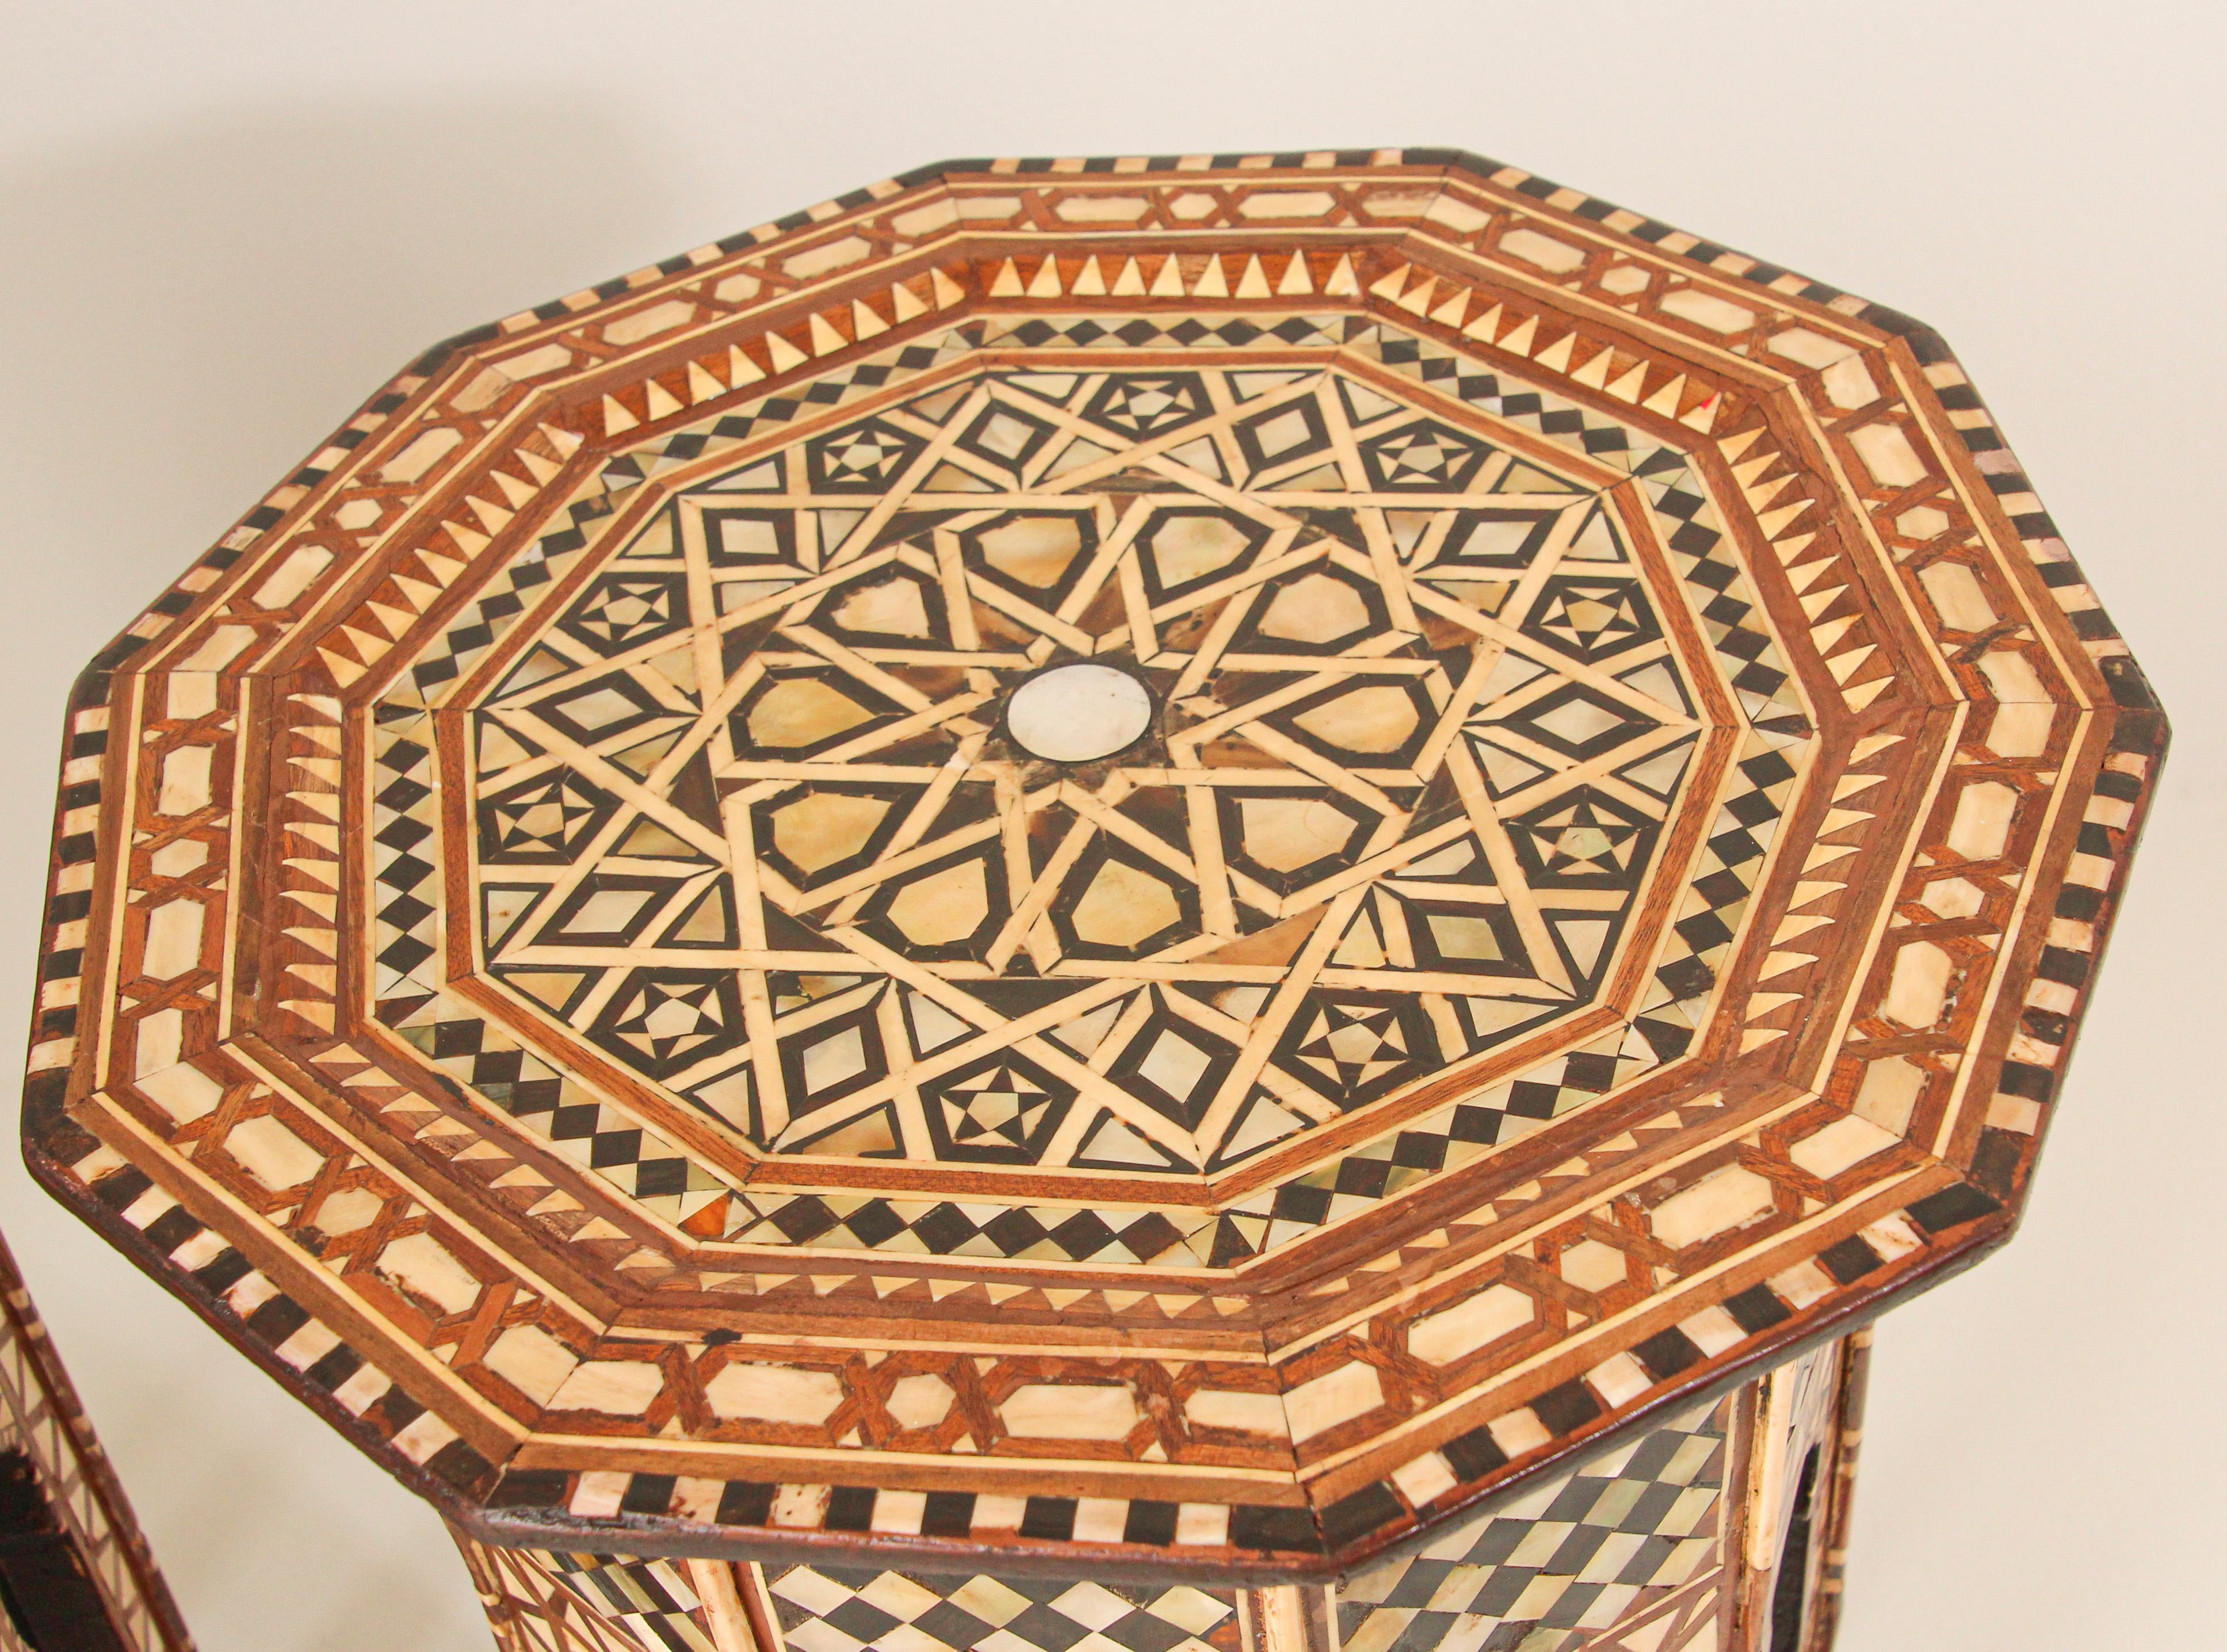 Set of two of Moorish walnut octagonal side tables inlaid with mosaic marquetry with Moorish arches on the eight sides,
Handcrafted by skilled artisans.
Great addition for any Moroccan room project.
Very intricate inlay Moorish